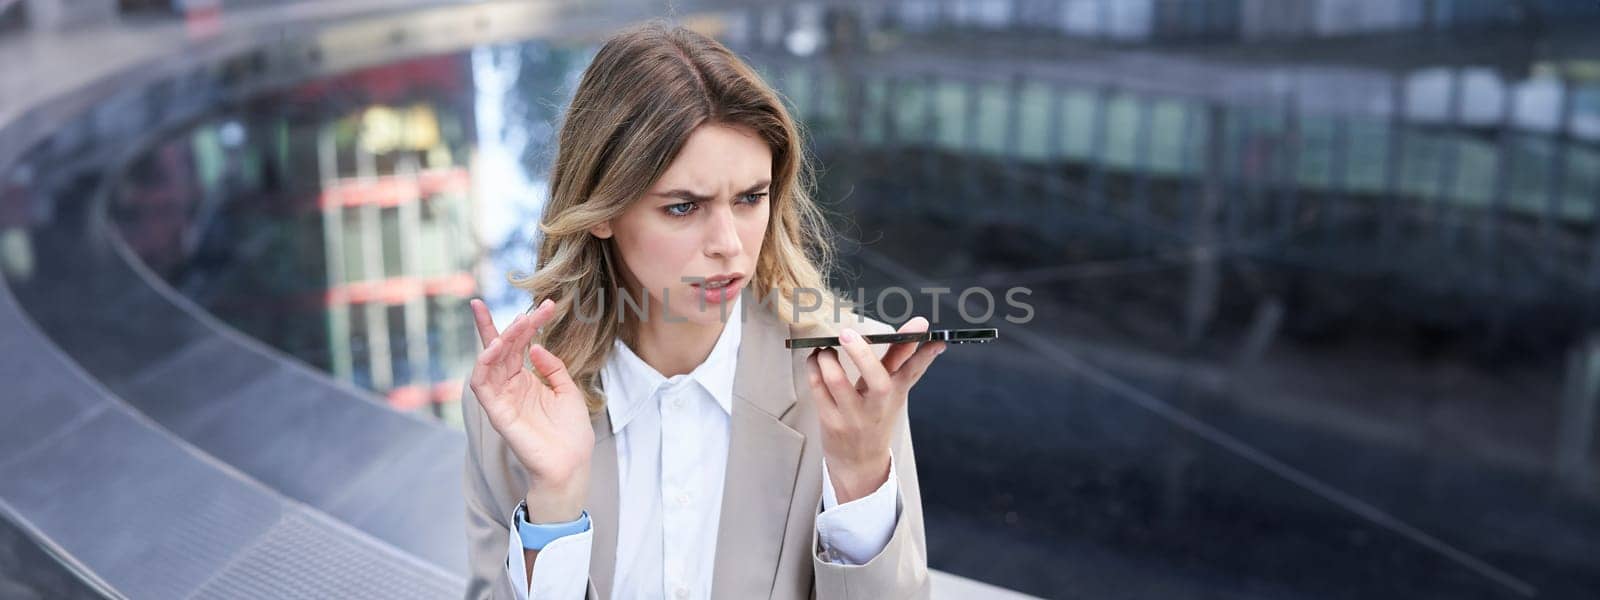 Woman looks angry while leaving voice message on mobile phone, talks into speakerphone with frowned face.